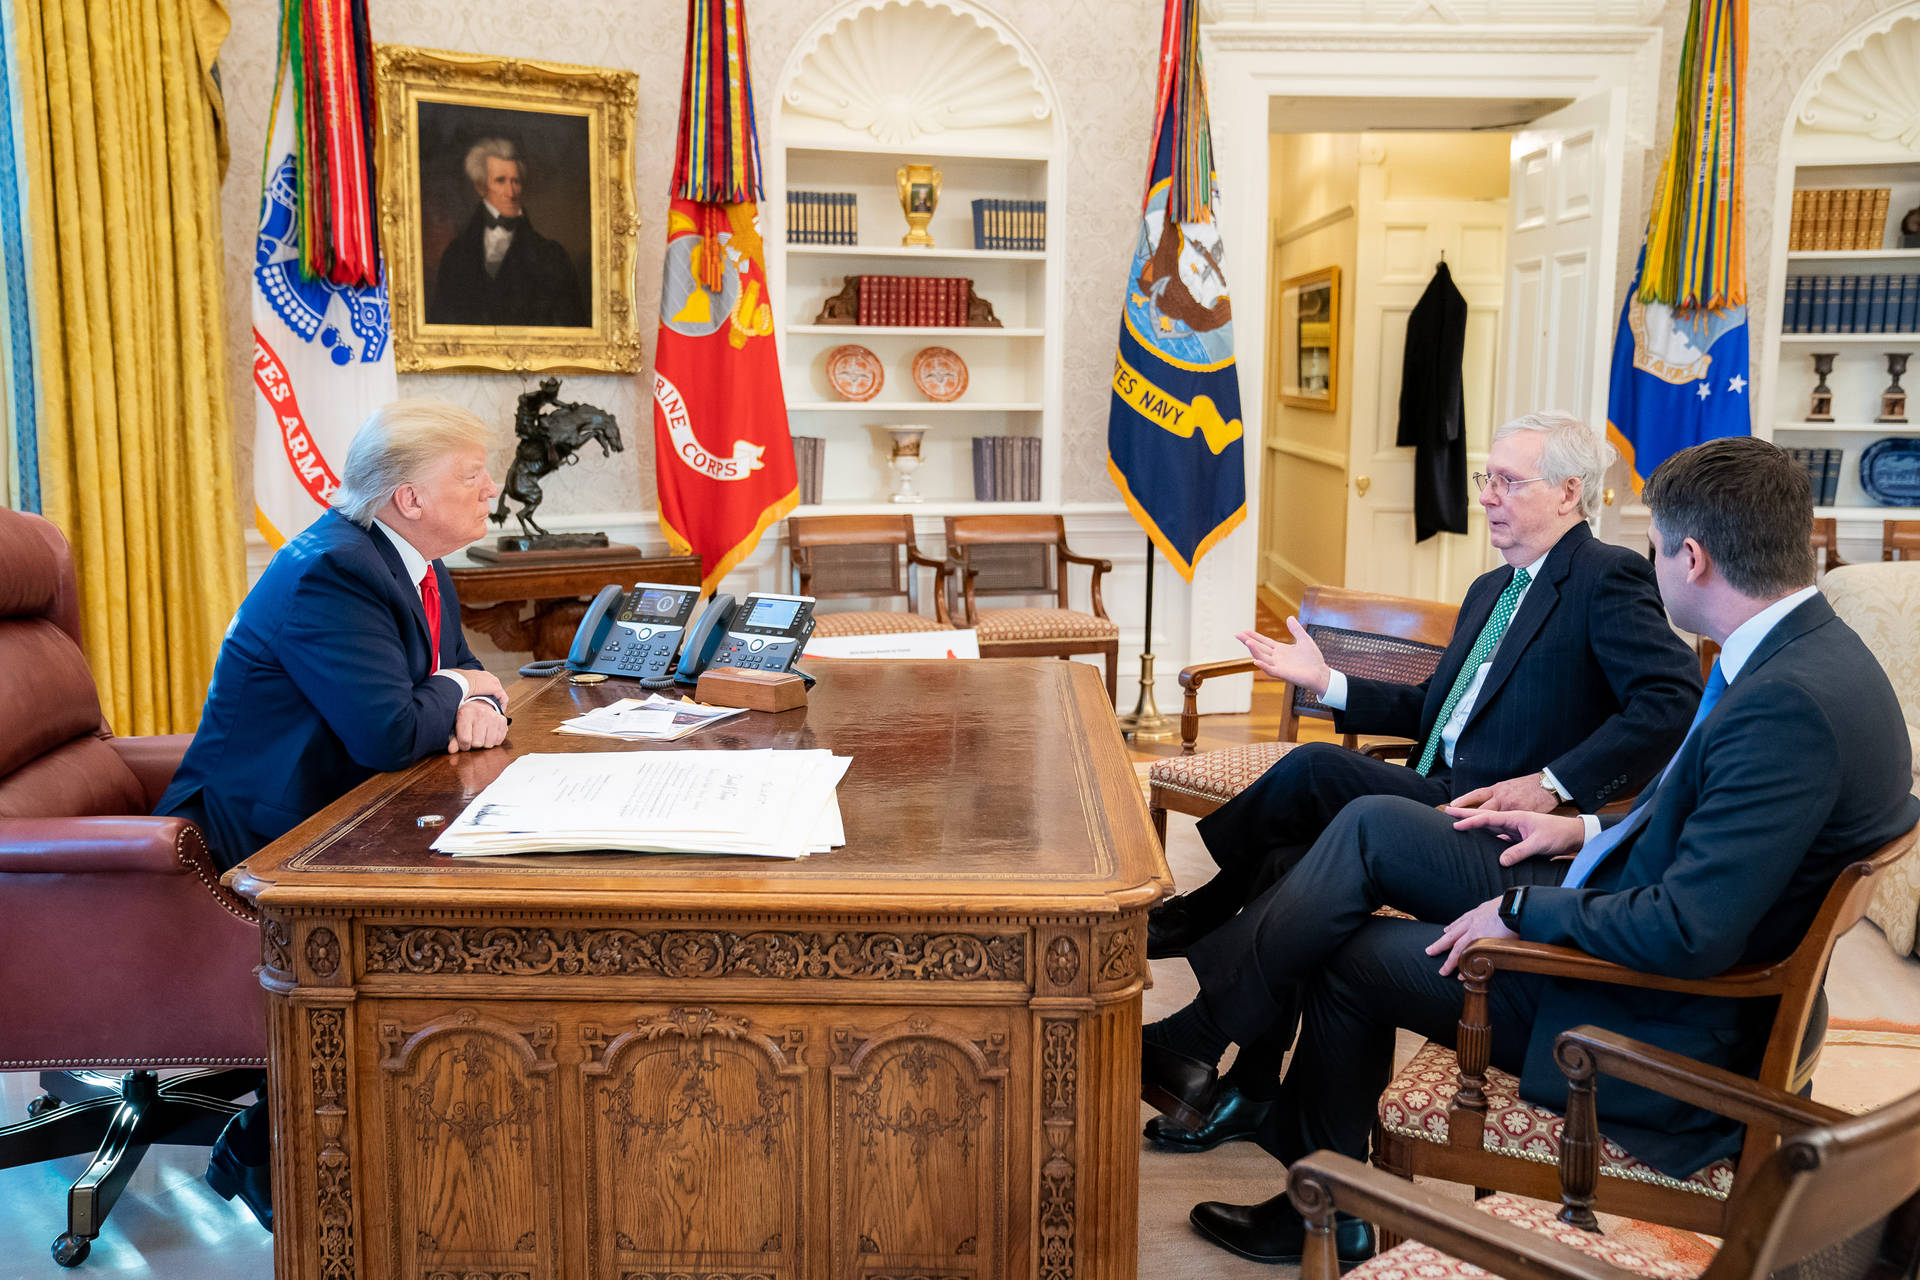 Mitch McConnell Meeting With President Trump in the Office Wallpaper